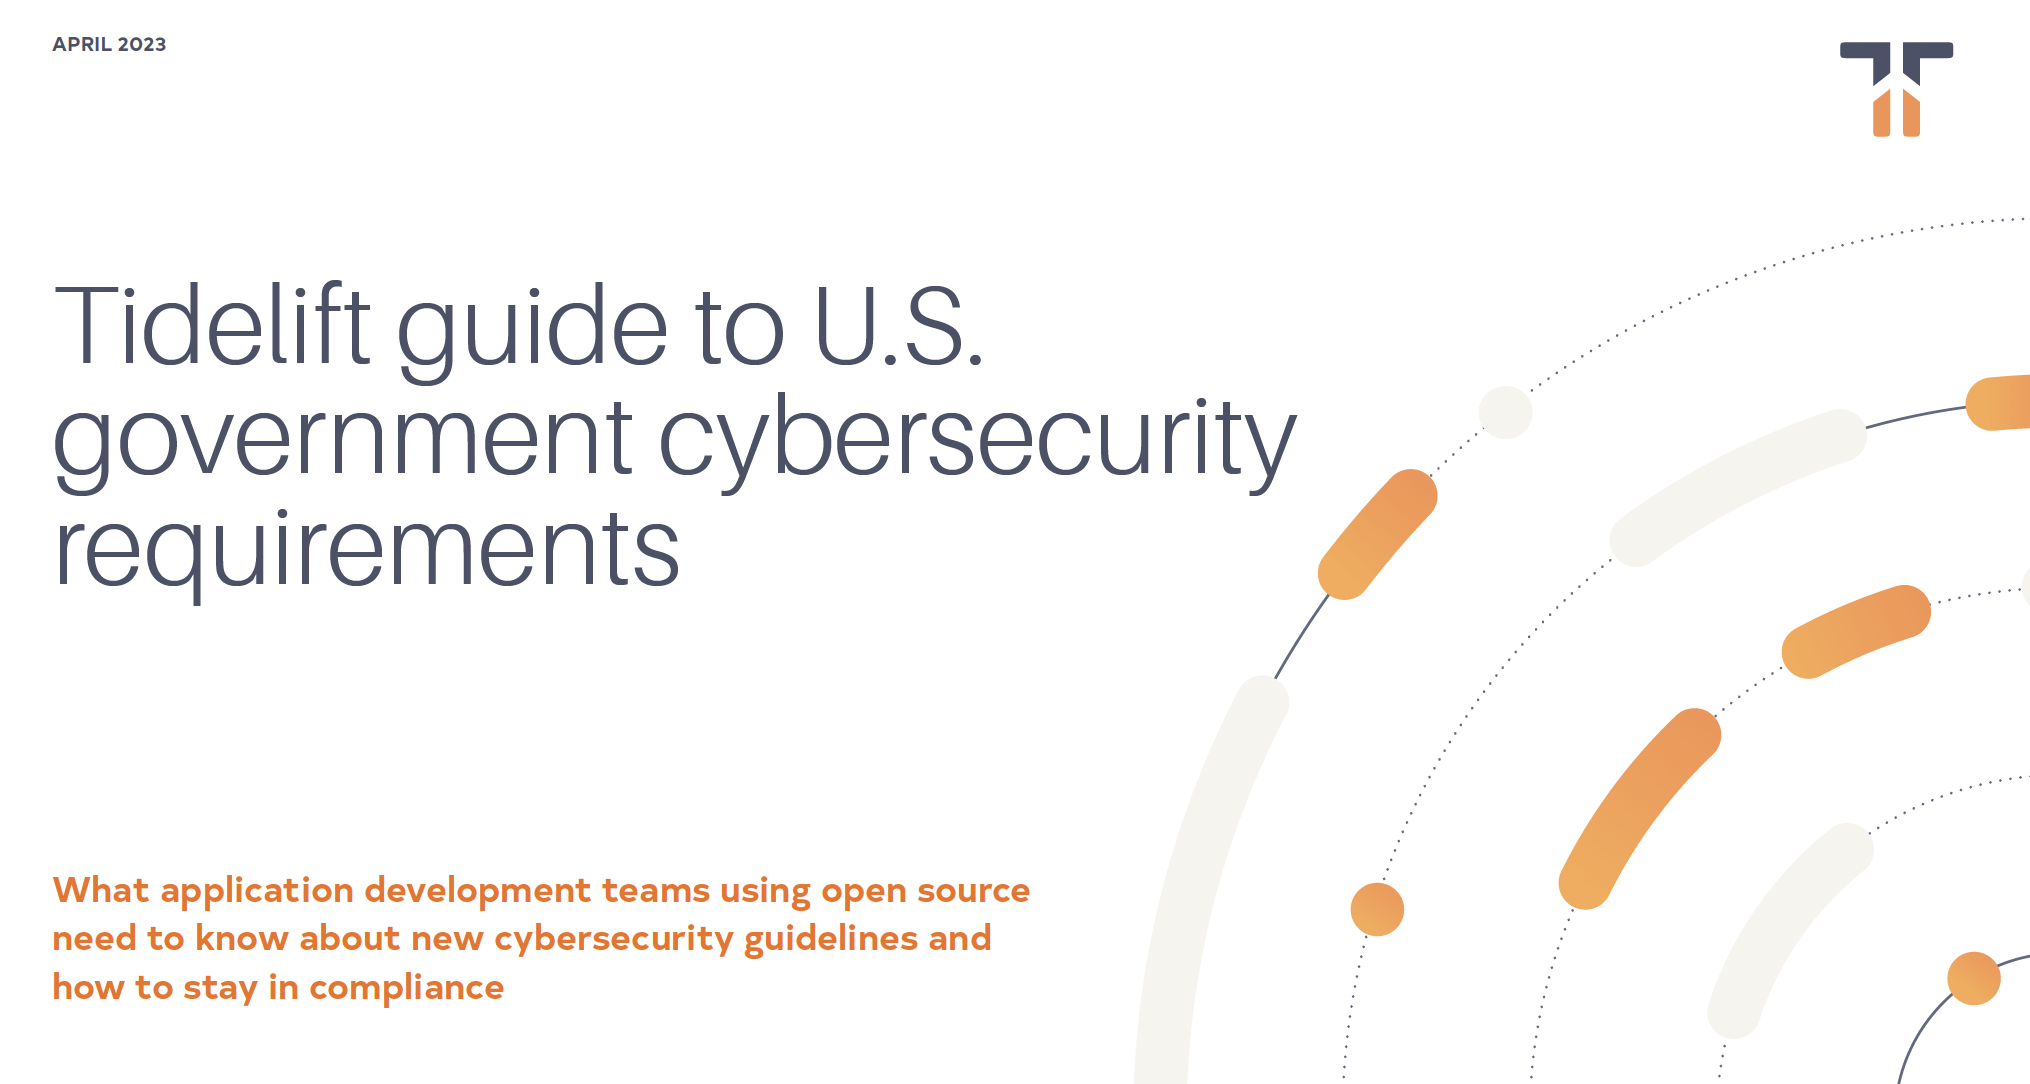 Tidelift guide to U.S. government cybersecurity requirements